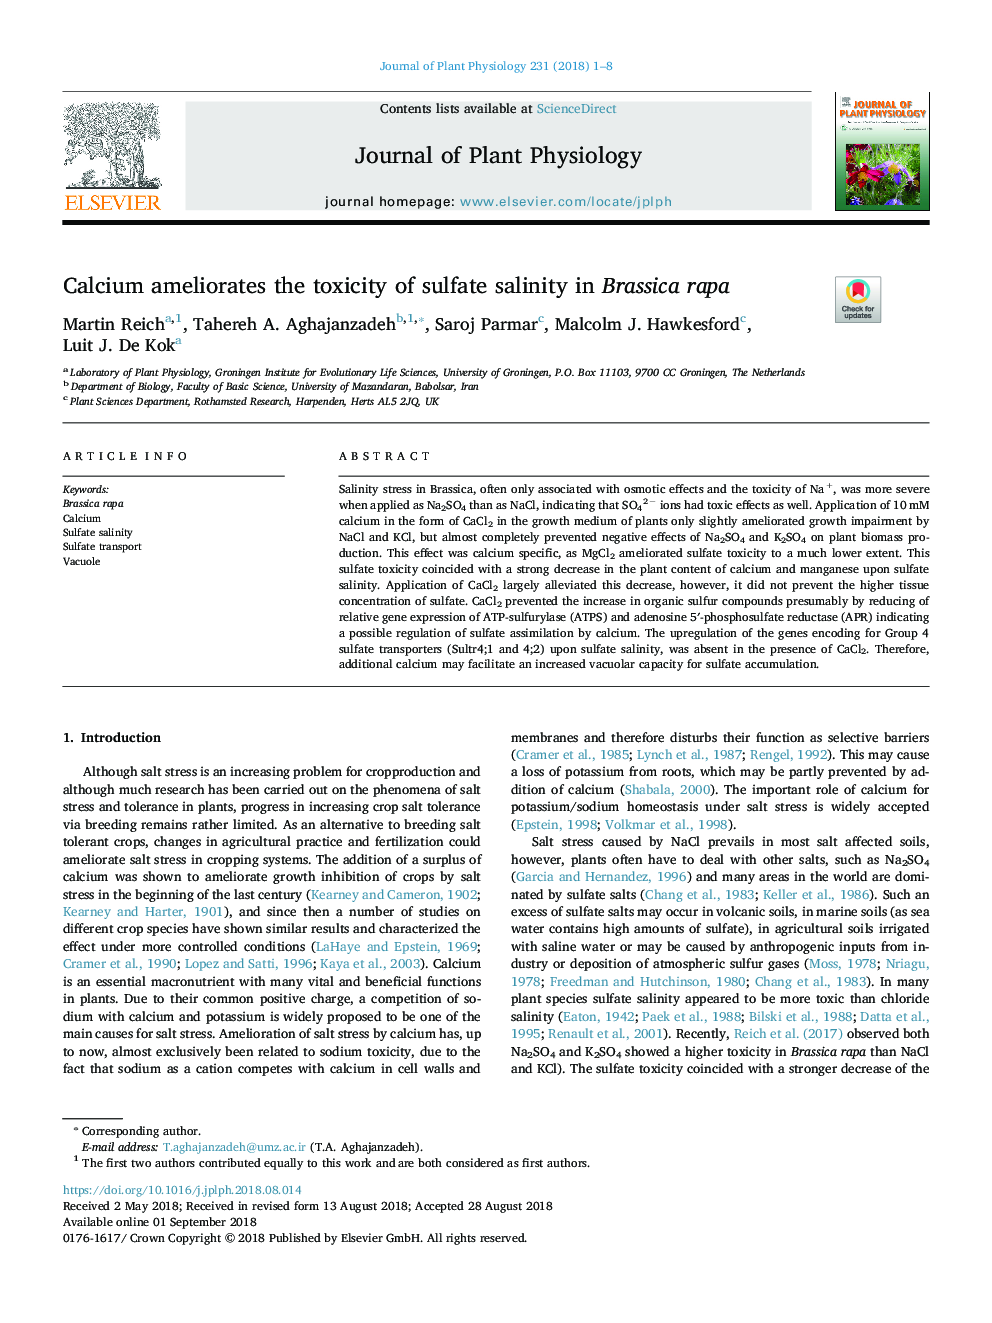 Calcium ameliorates the toxicity of sulfate salinity in Brassica rapa